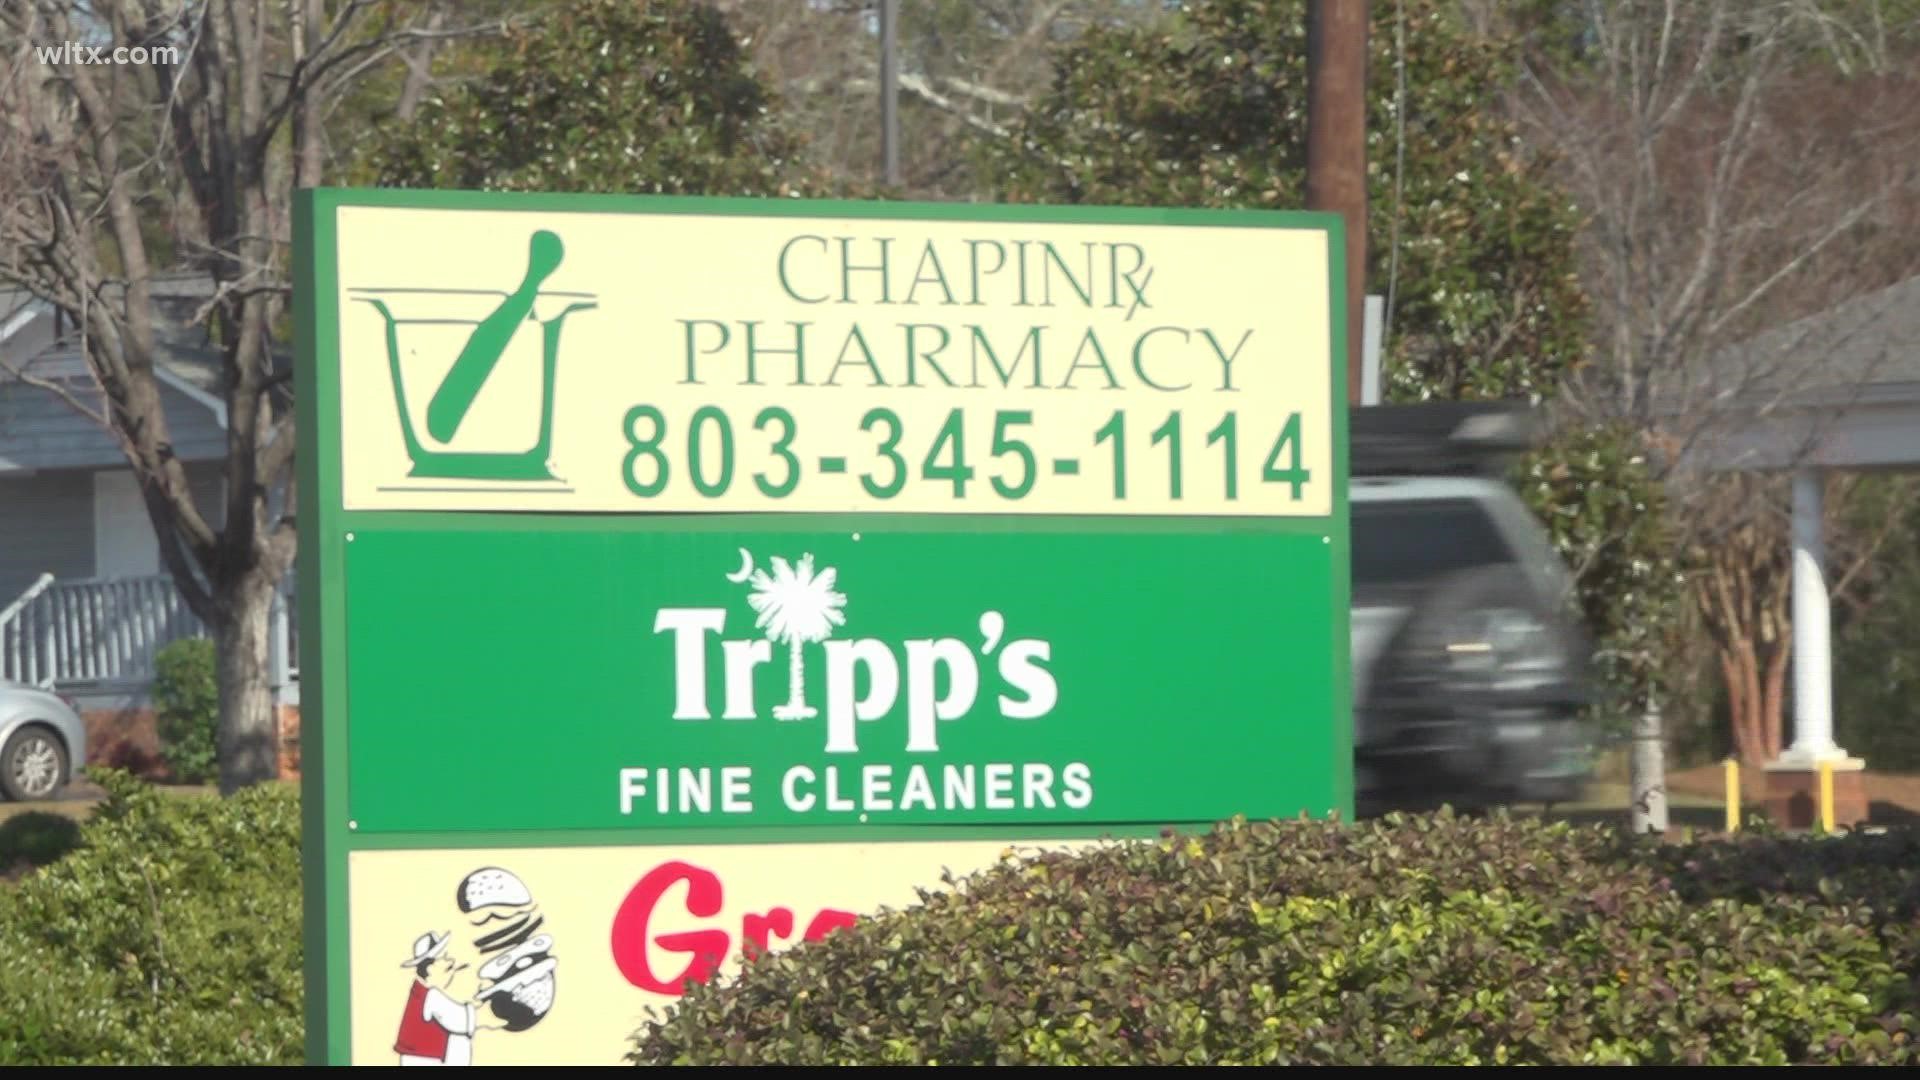 Several local pharmacies tell News 19 they are sold out of at-home COVID-19 tests and may not get any new shipments for weeks.